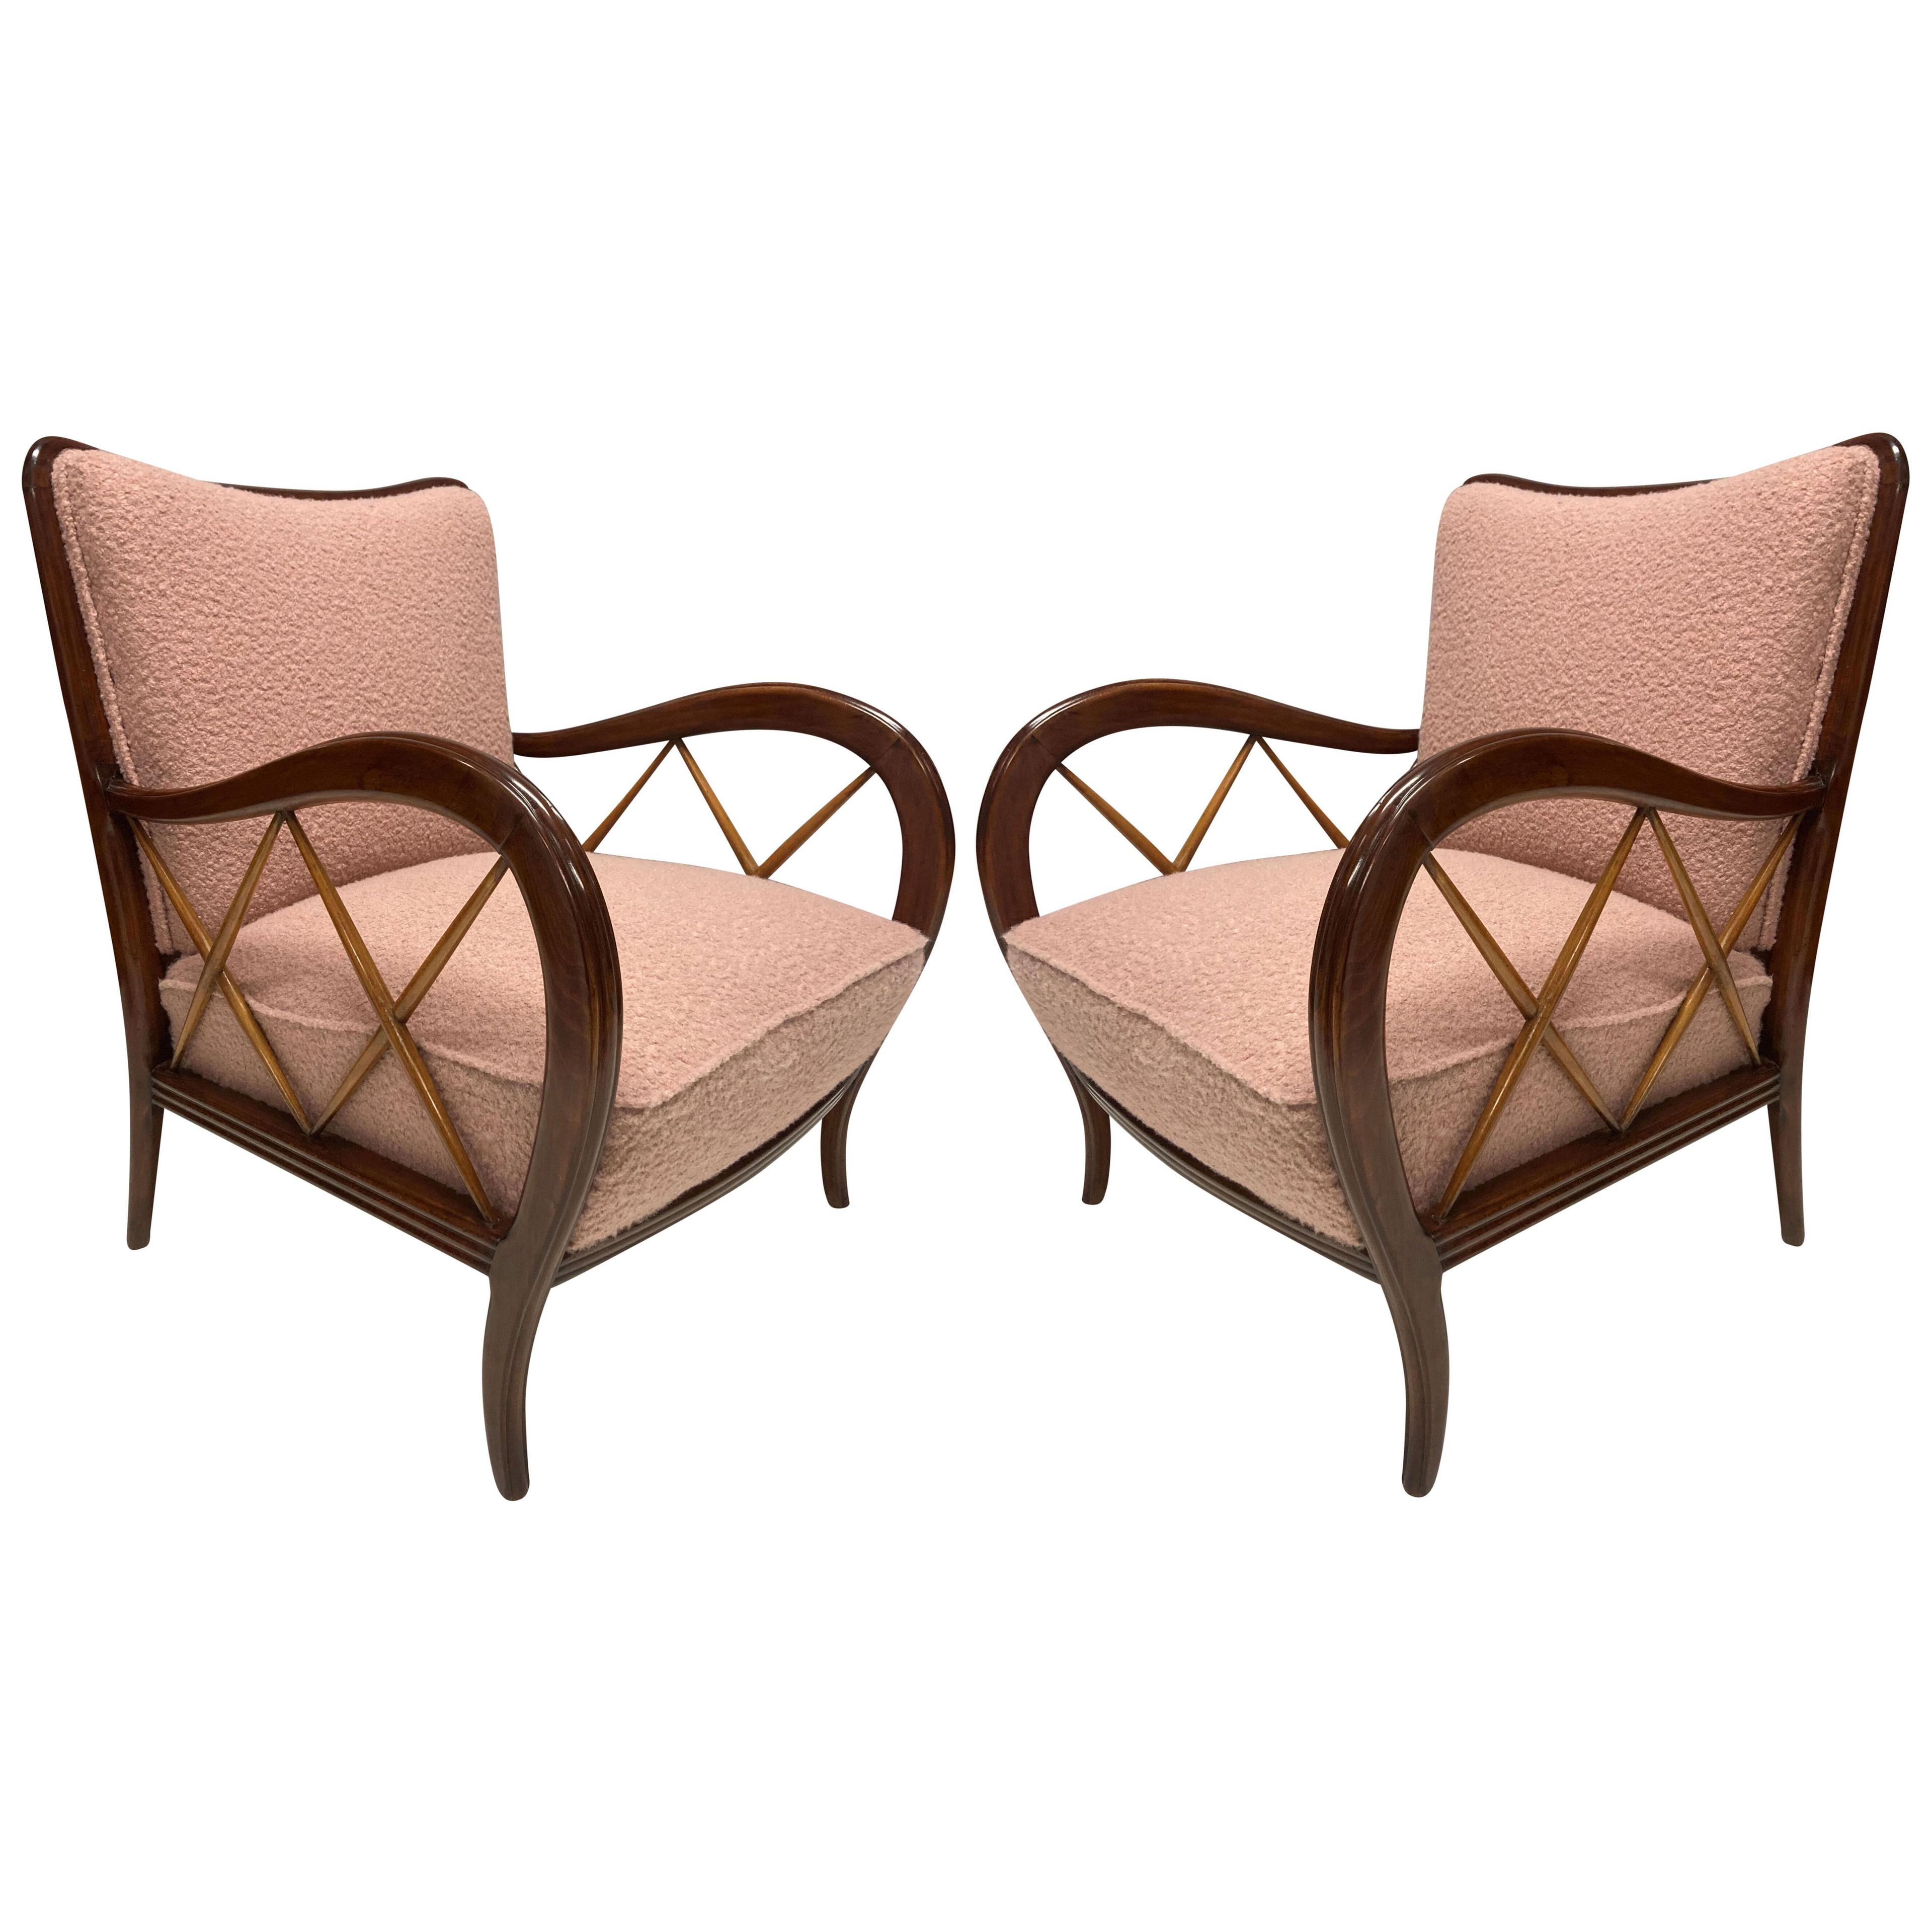 A PAIR OF LOUNGE CHAIRS BY PAOLO BUFFA